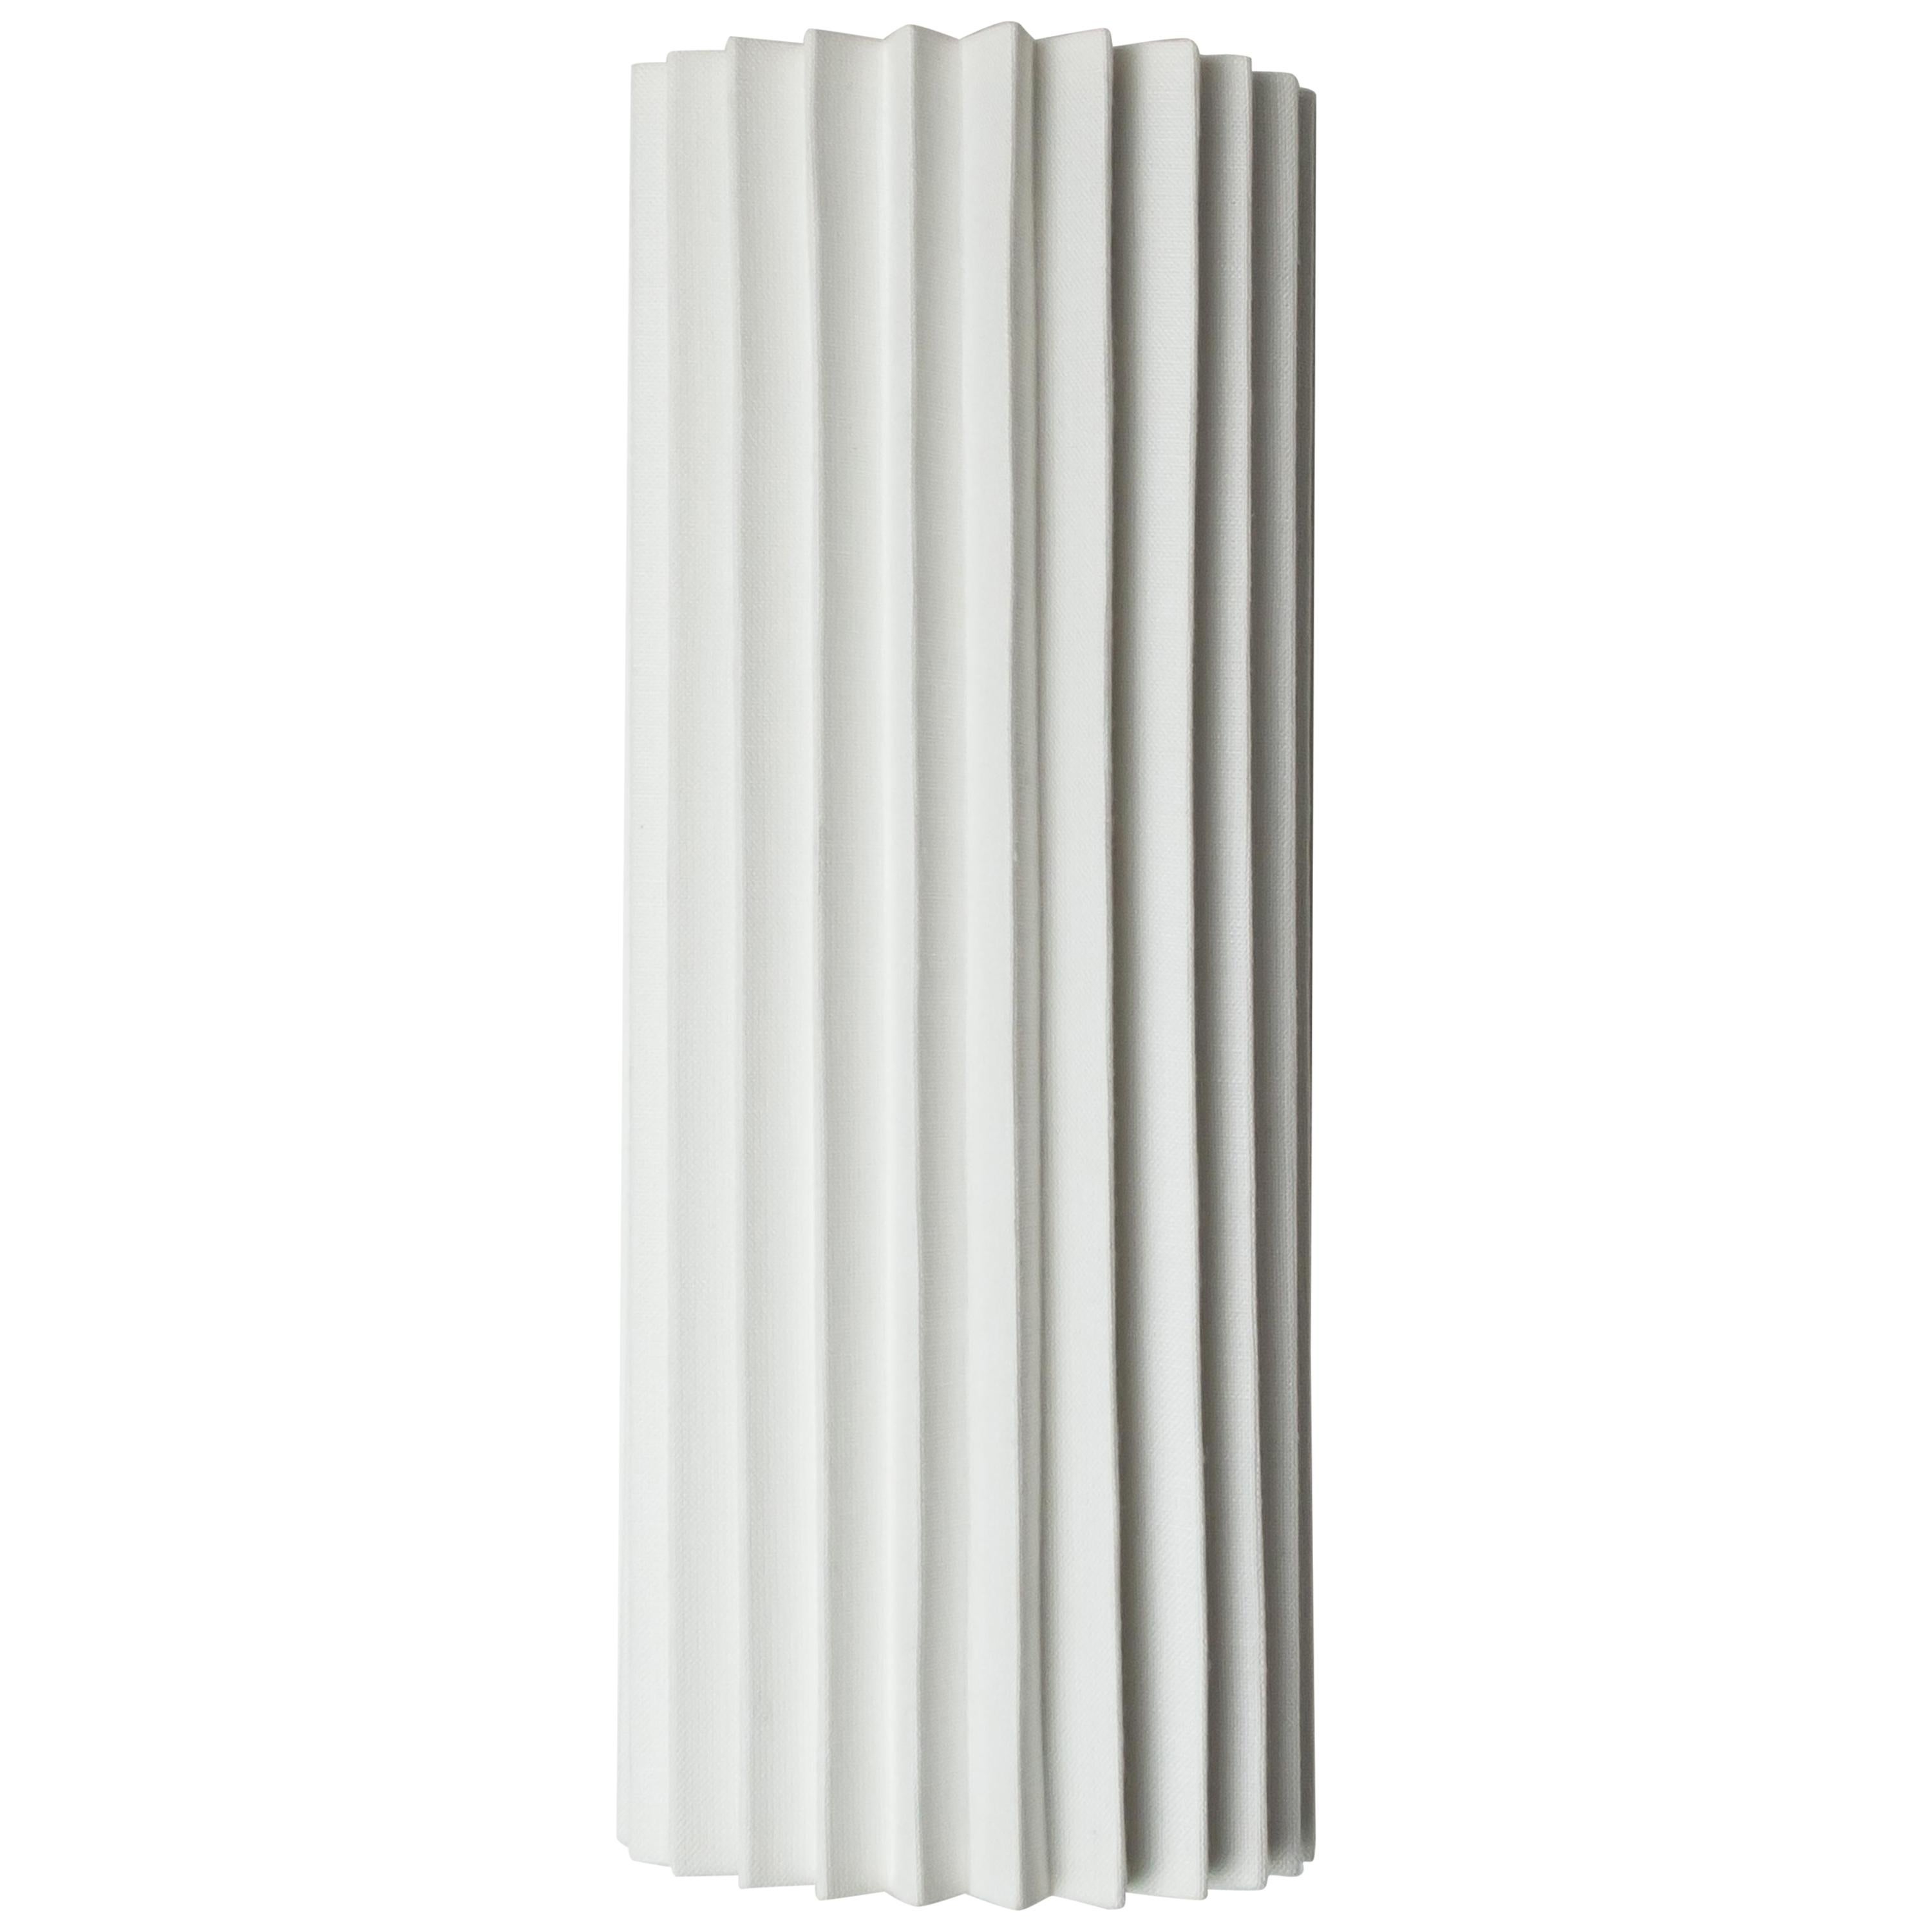 Contemporary Pleated Wall Light with Linen Shade Off-White Handmade, Set of 5no. For Sale